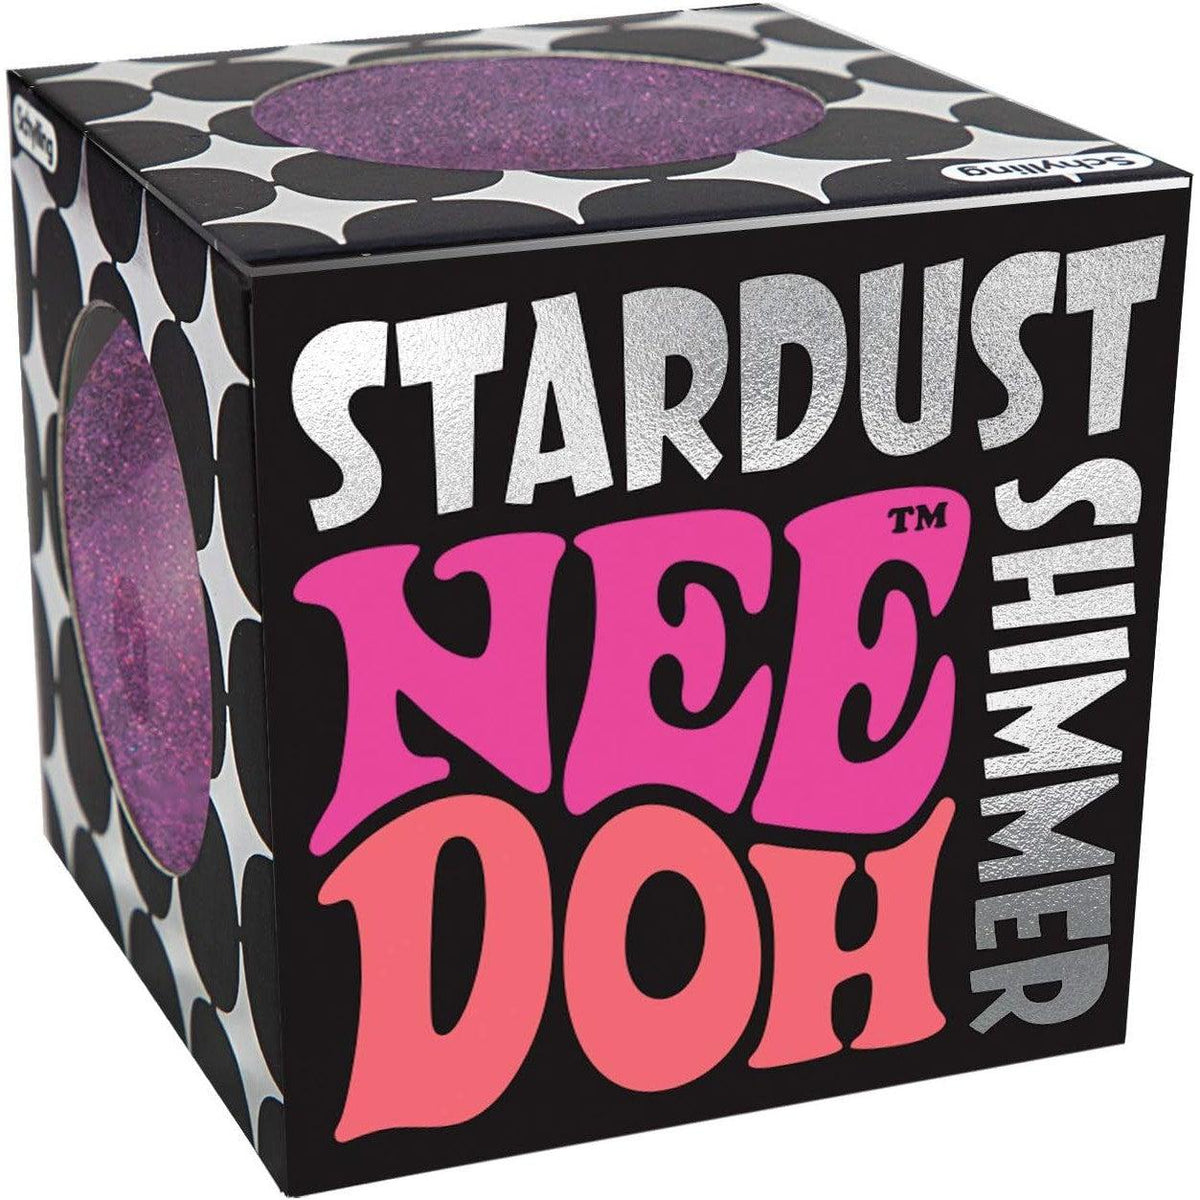 Front view of purple Stardust Nee Doh in its packaging.